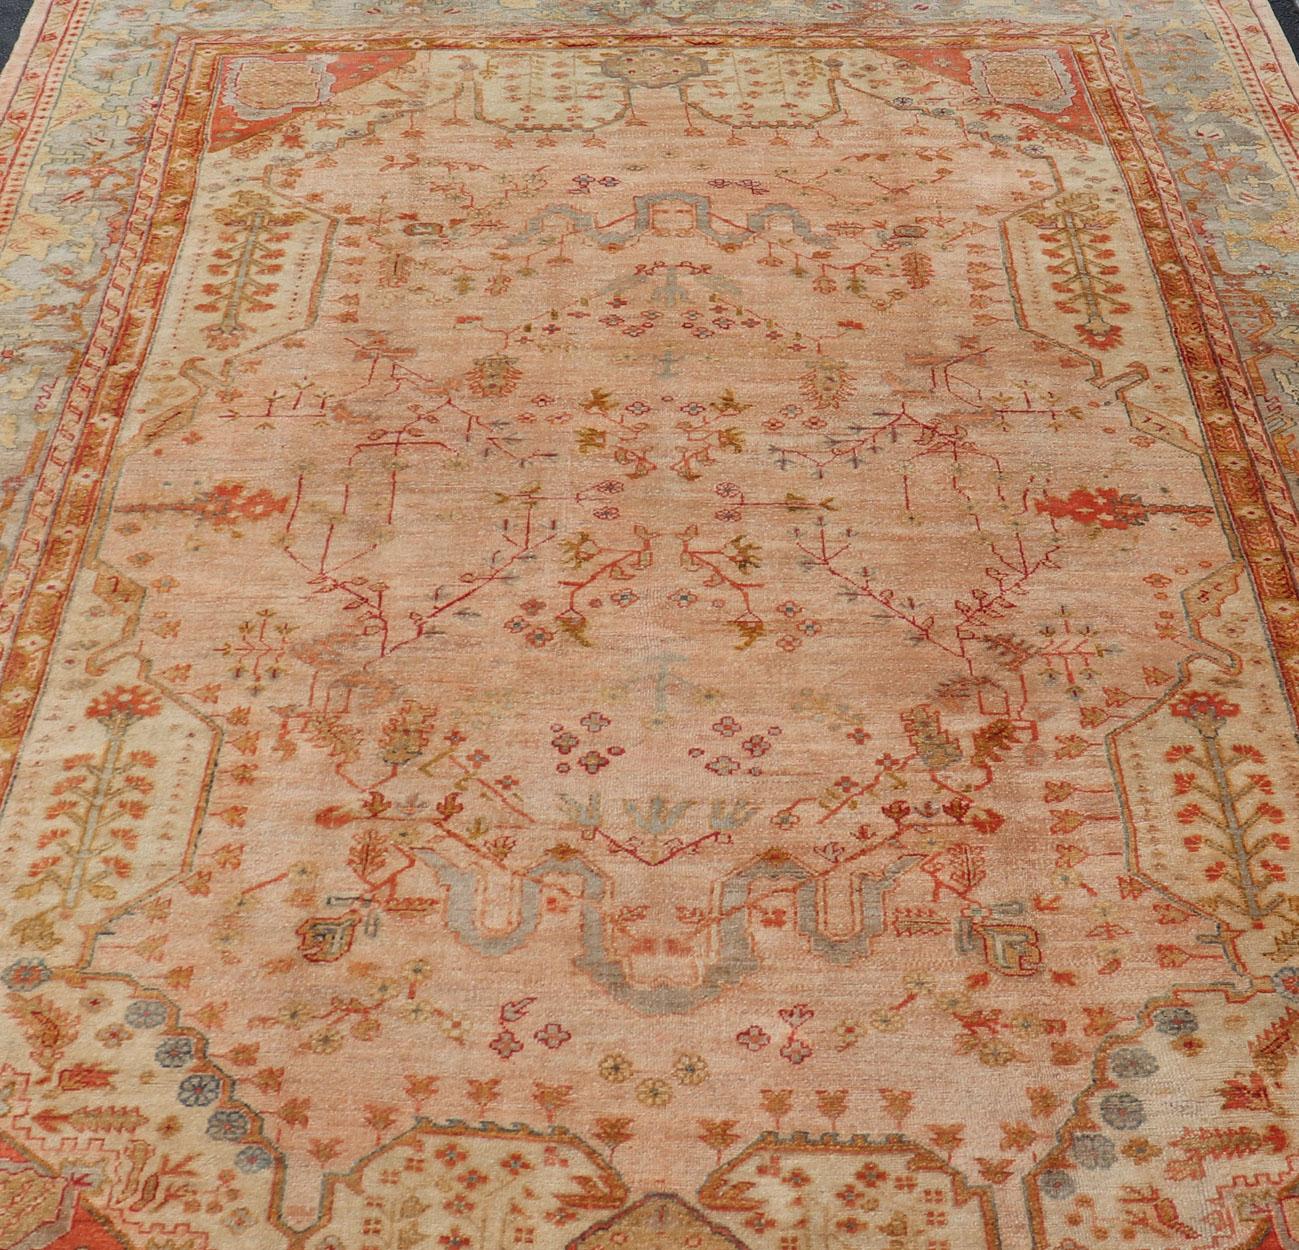 This large late 19th century antique turkish oushak rug displays a colorful palette in Salmon, Green, pink, Yellow, Orange, cream, red, Antique Oushak, Keivan Woven Arts; rug S12-1213, Country of Origin: Turkey Type: Antique Oushak Design: Floral,